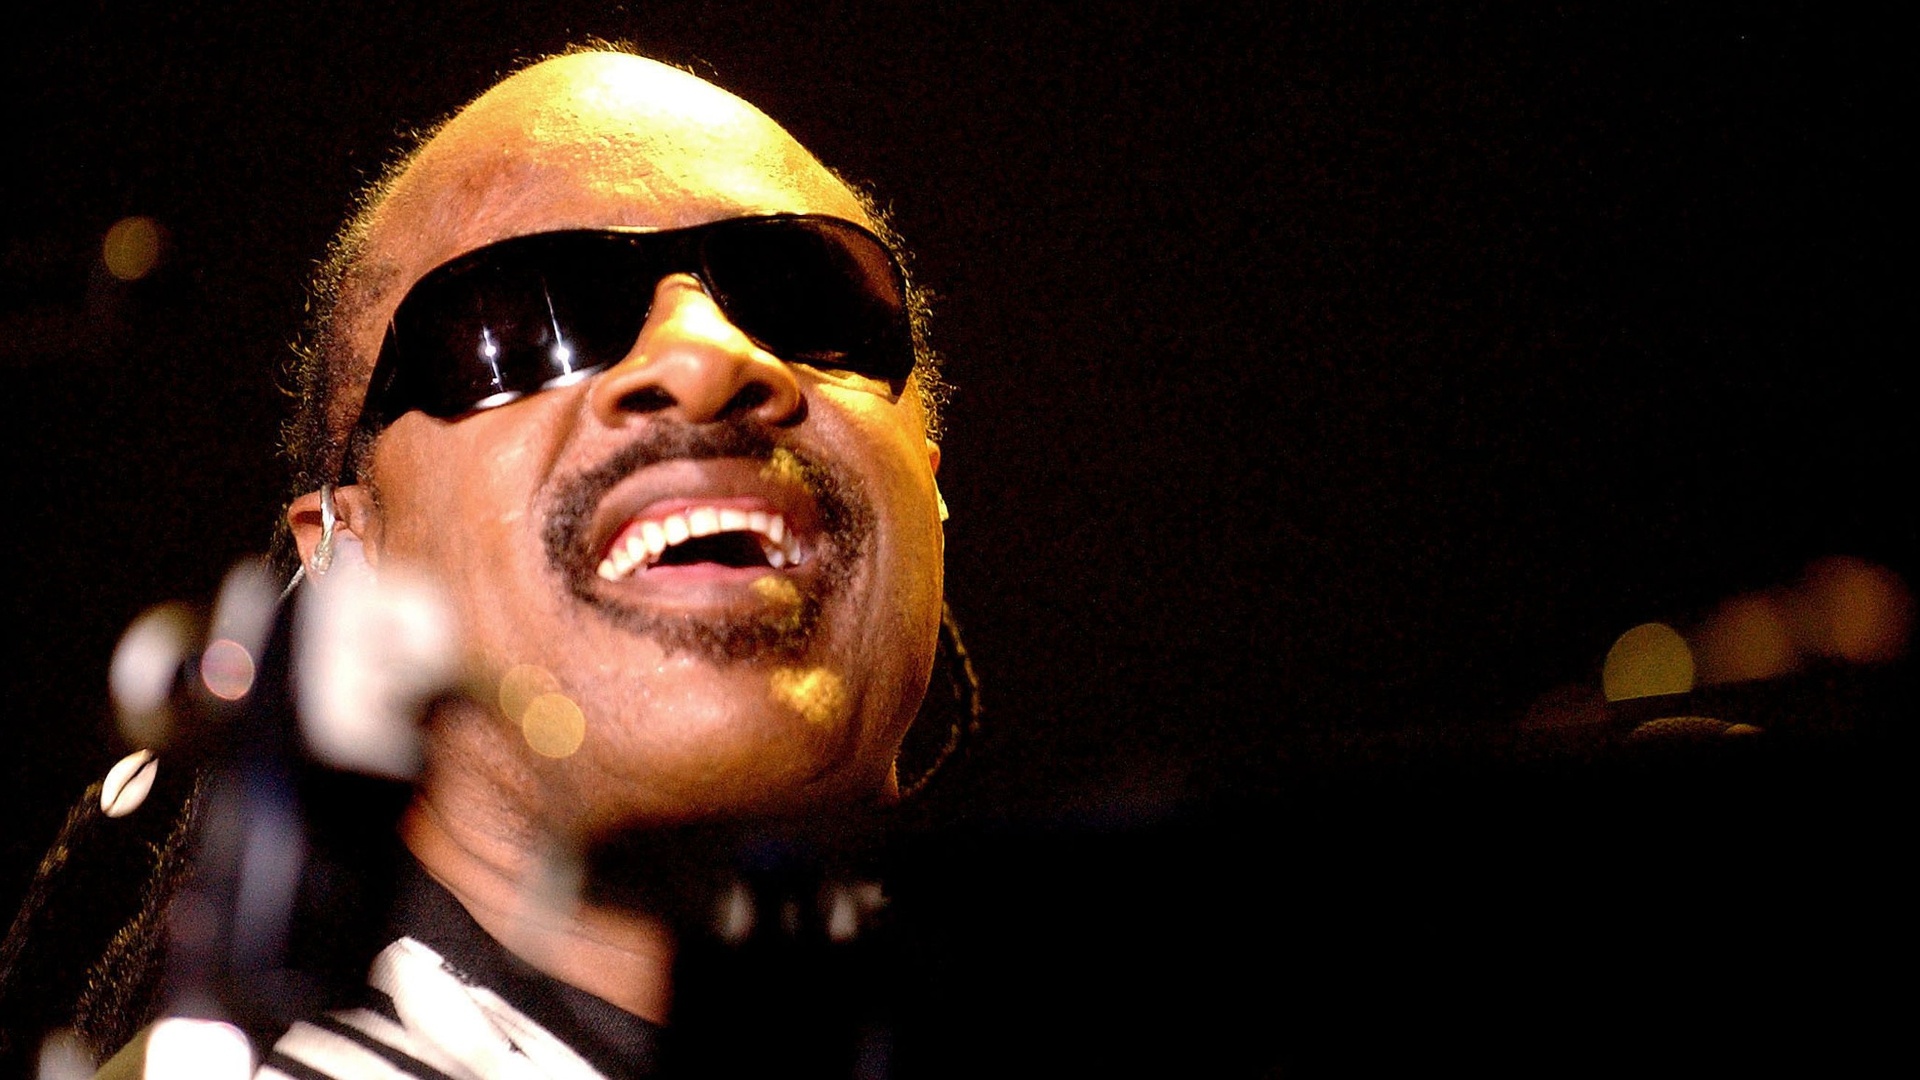 Stevie Wonder wallpapers, Music icon, HQ pictures, 4K wallpapers, 1920x1080 Full HD Desktop